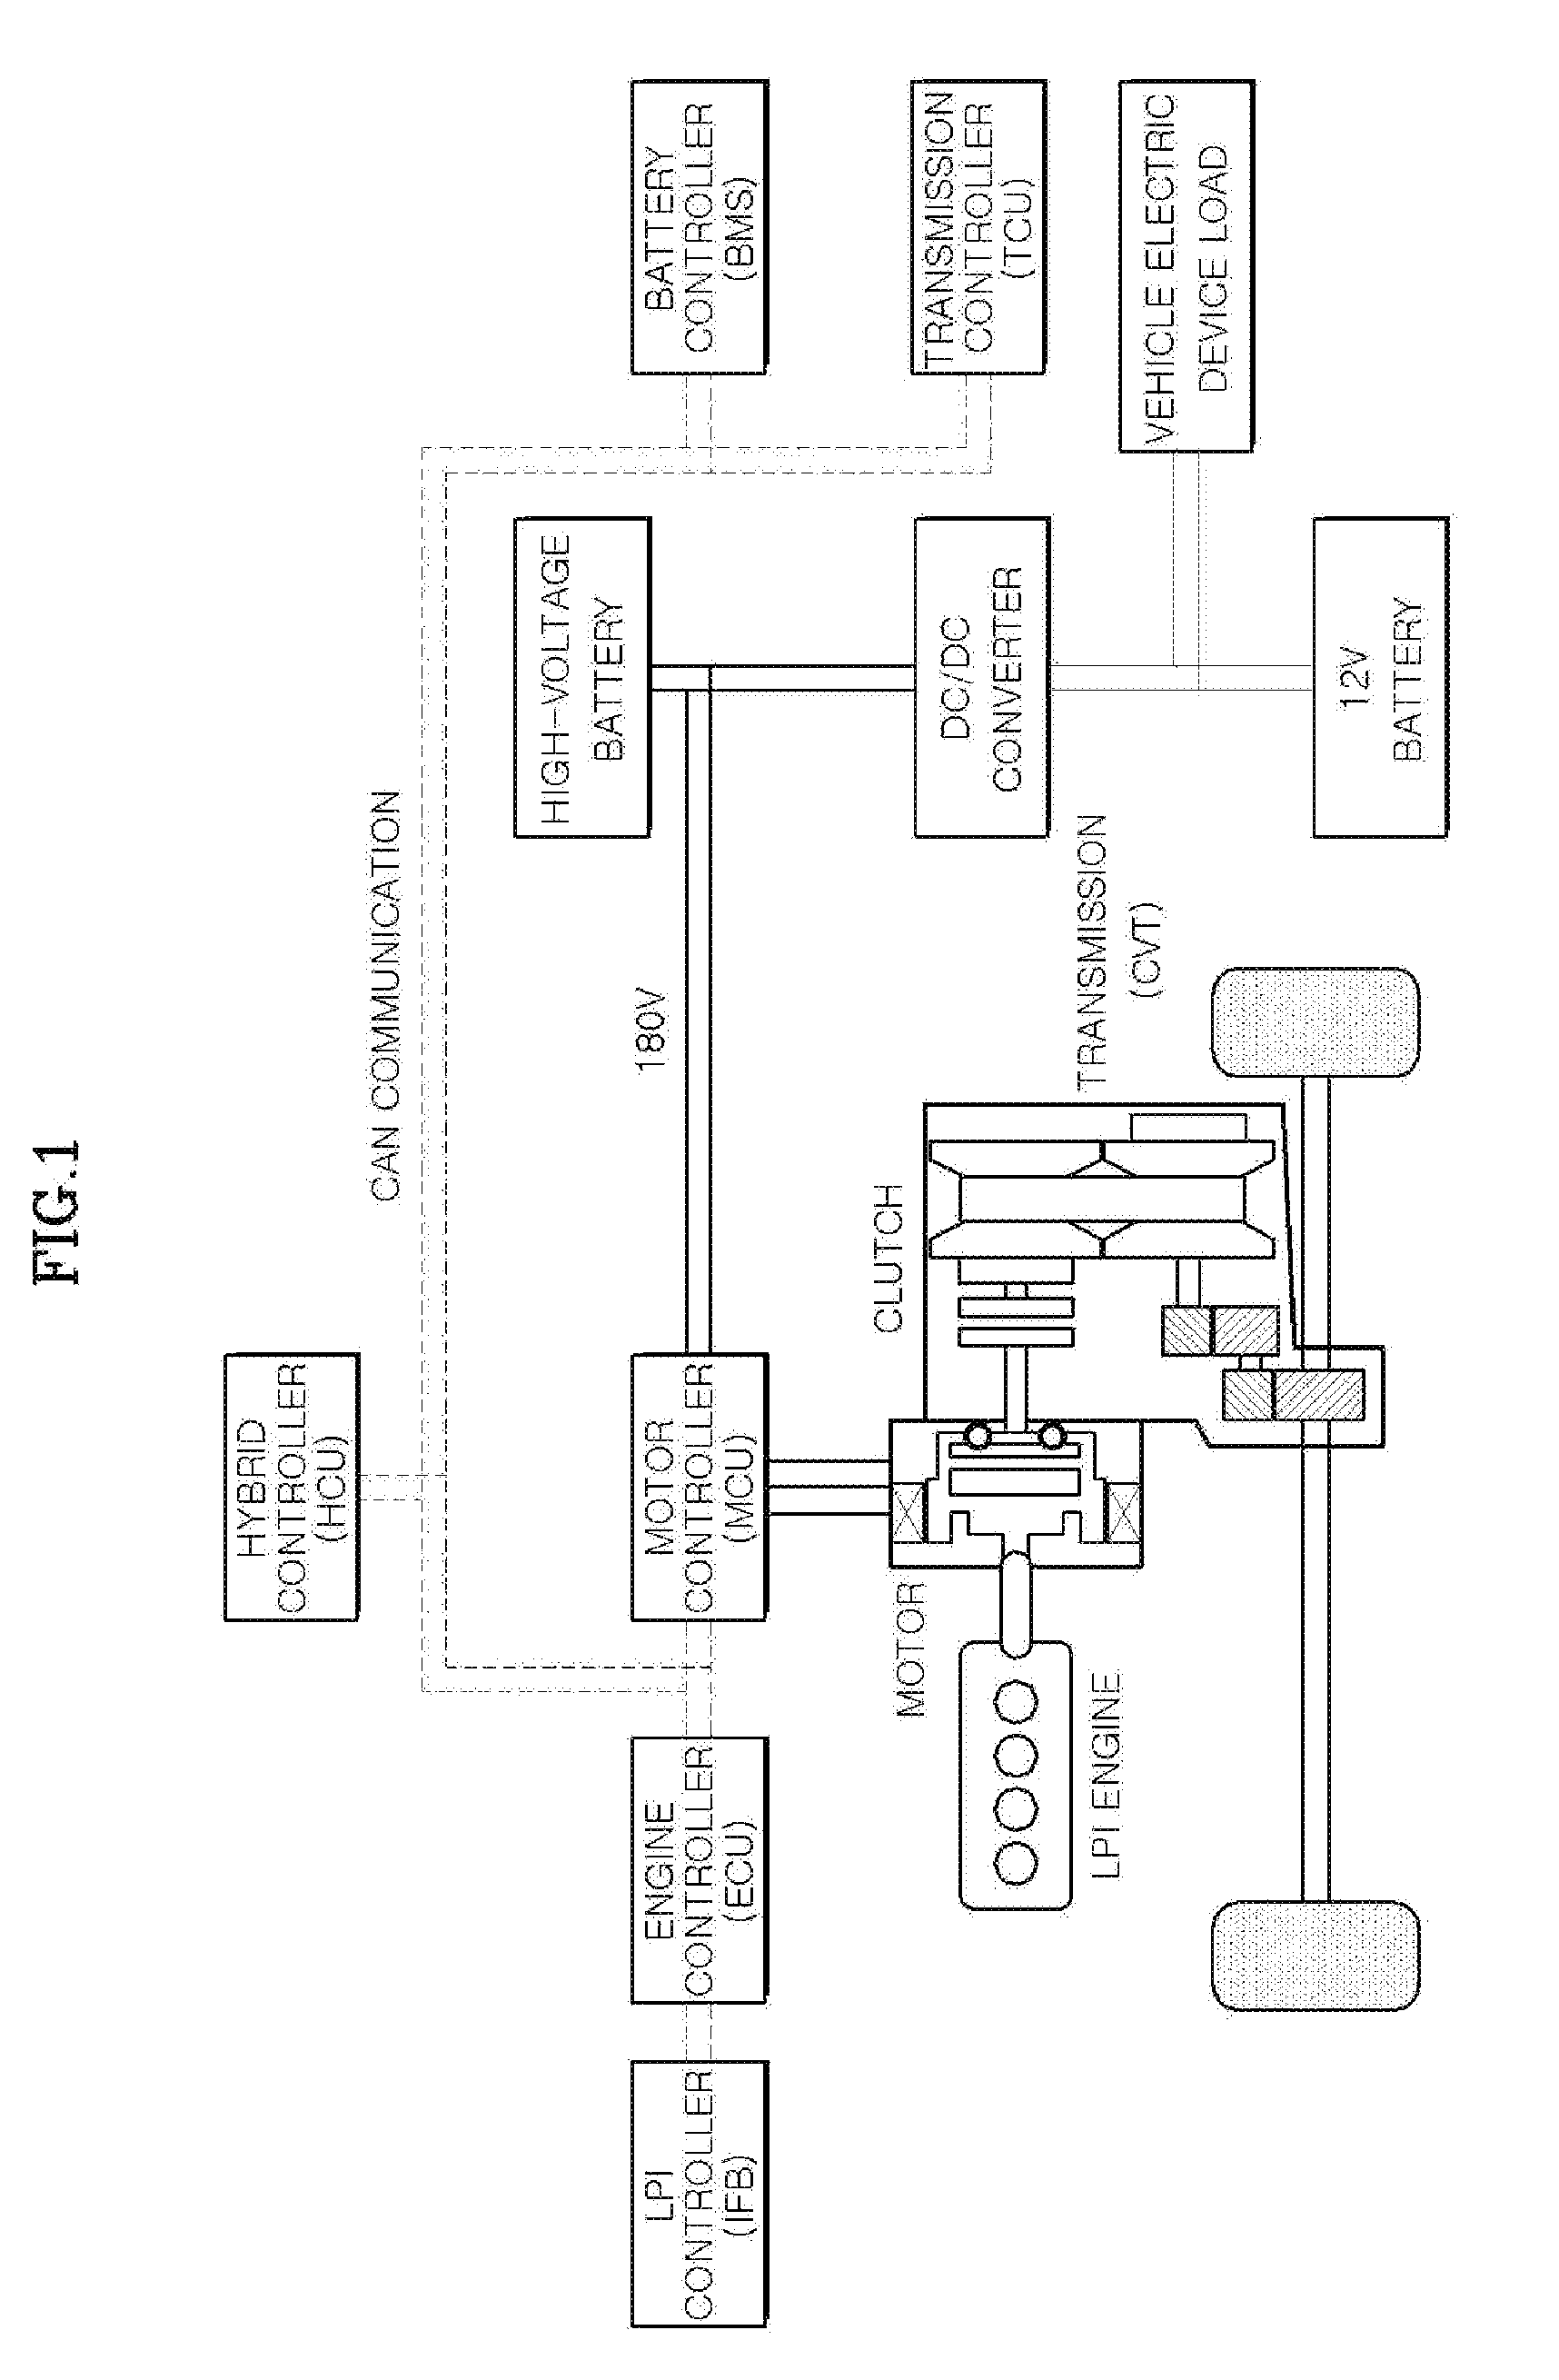 Variable voltage control system and method for hybrid vehicle